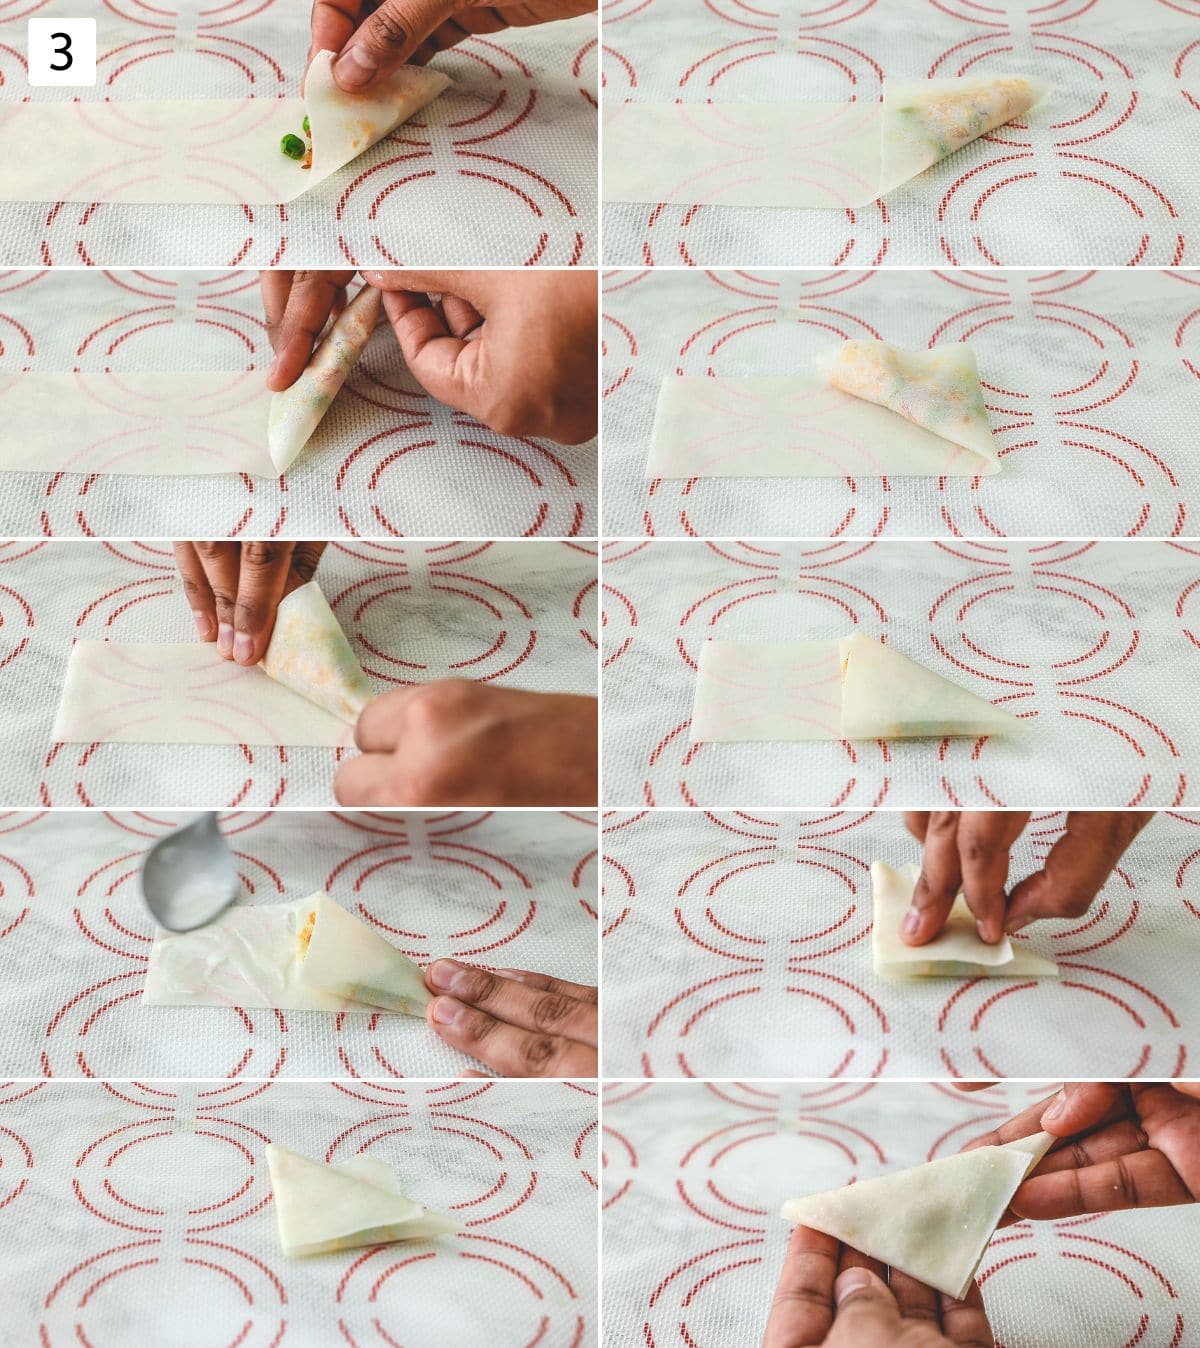 Collage of images showing how to shape the mini samosa.